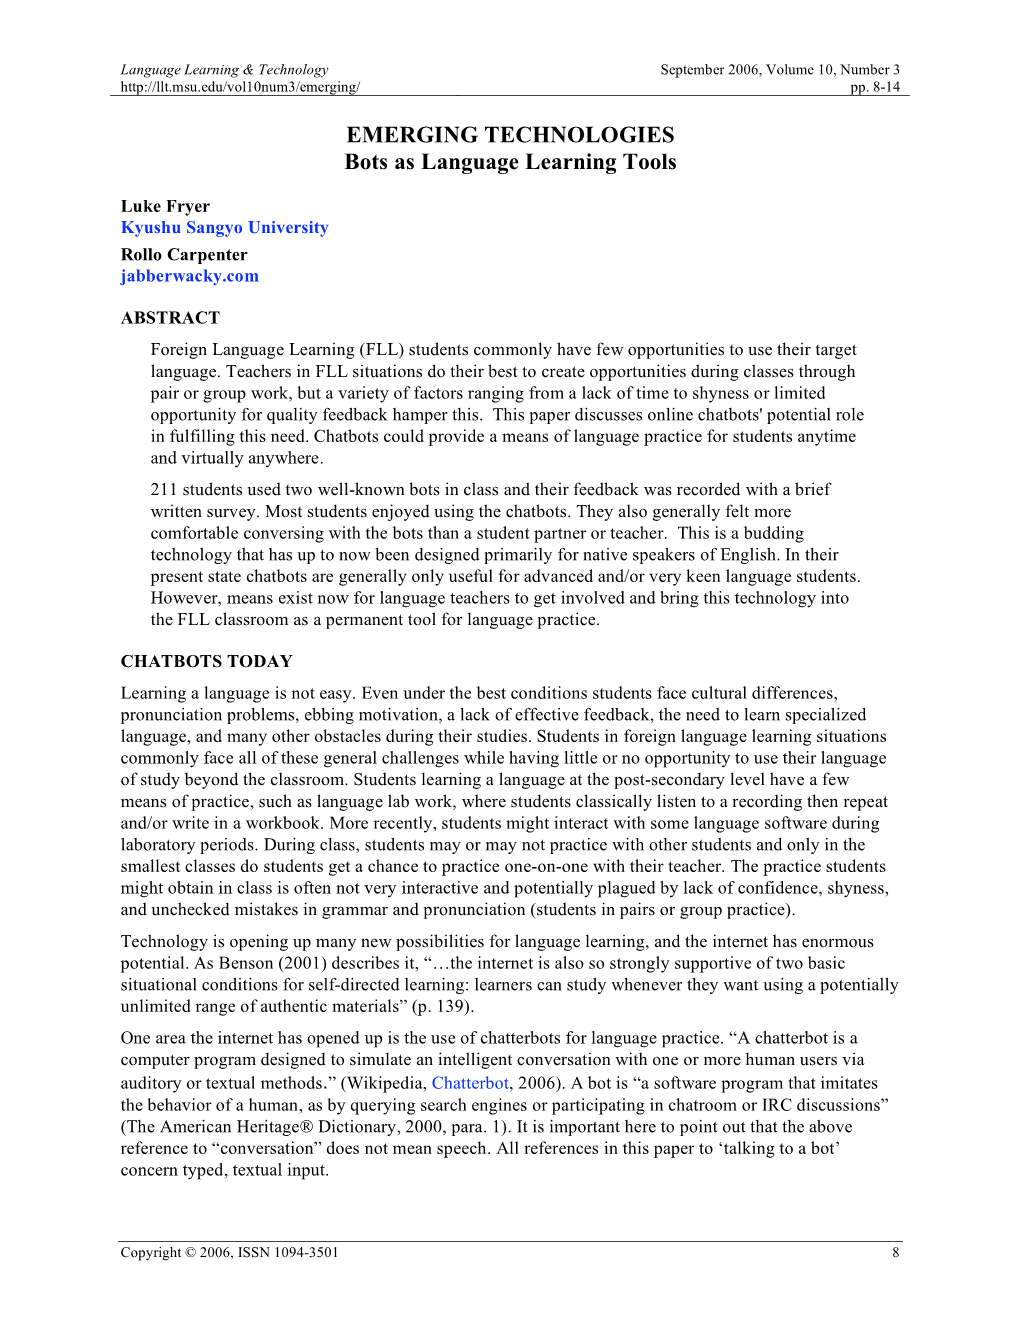 EMERGING TECHNOLOGIES Bots As Language Learning Tools